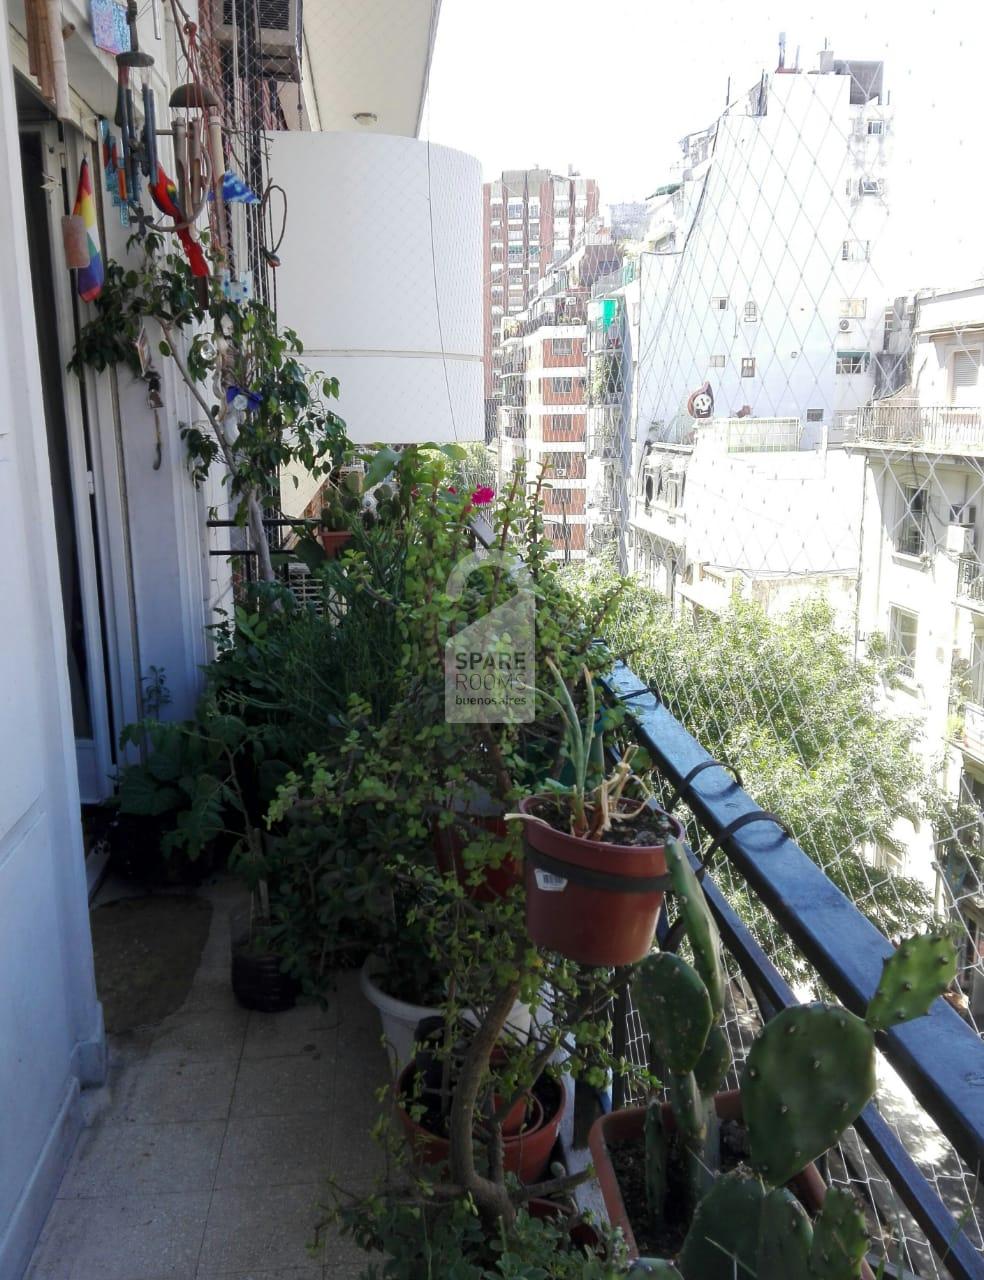 THE BALCONY at the apartment in Palermo